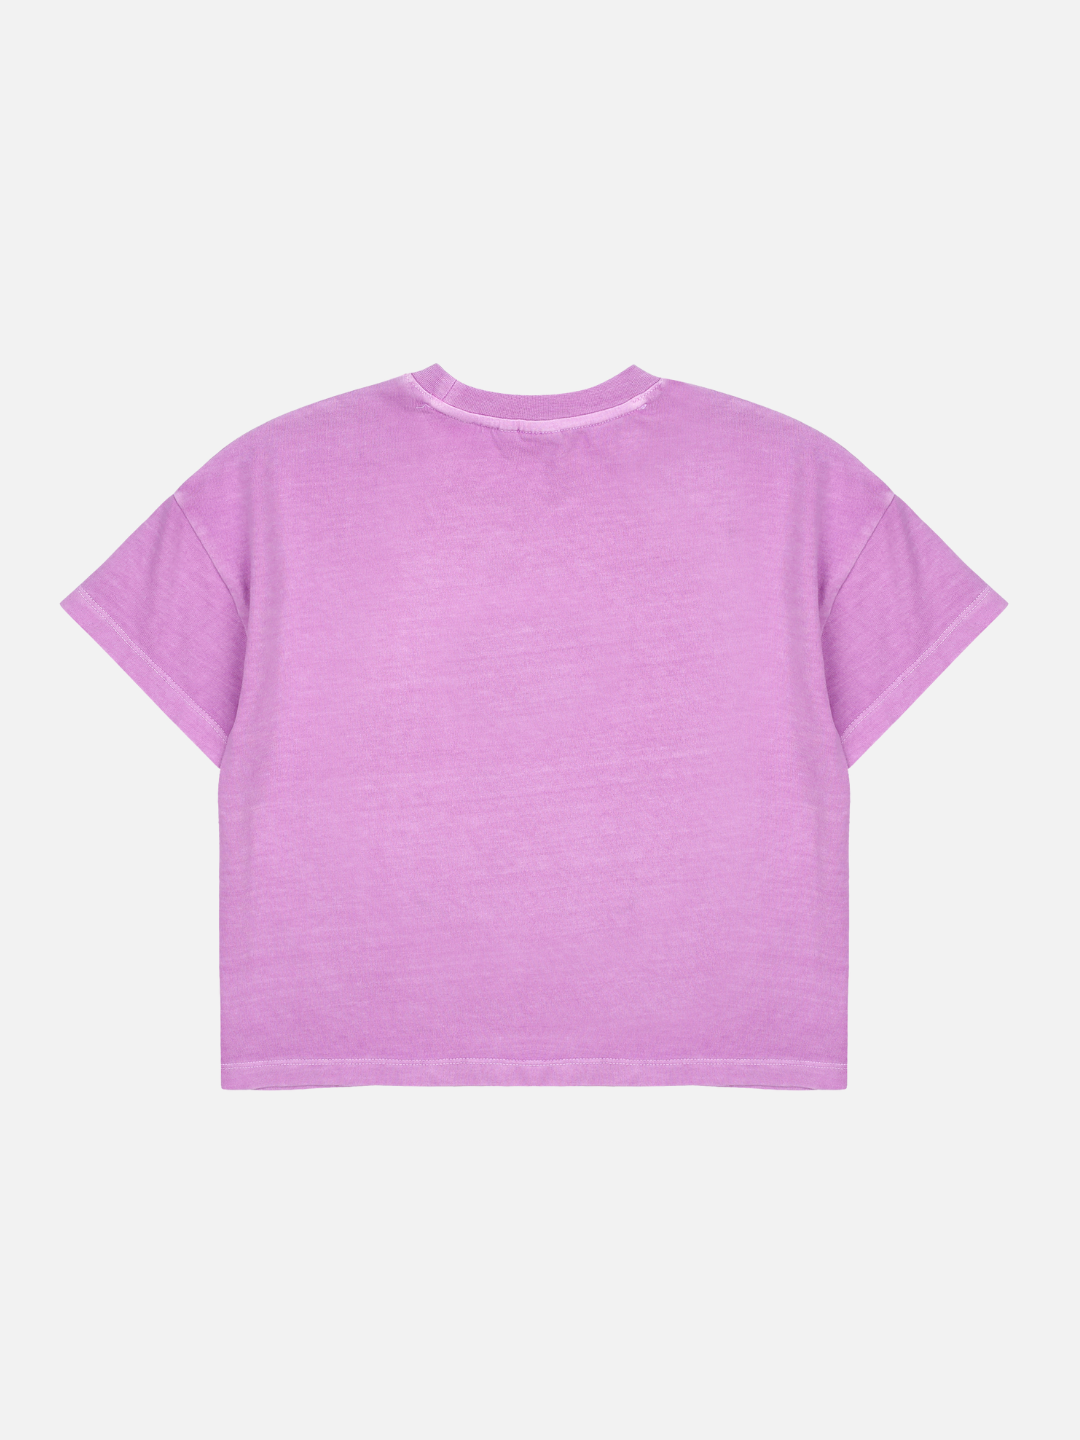 Back of T-shirt with no design and a light purple background.